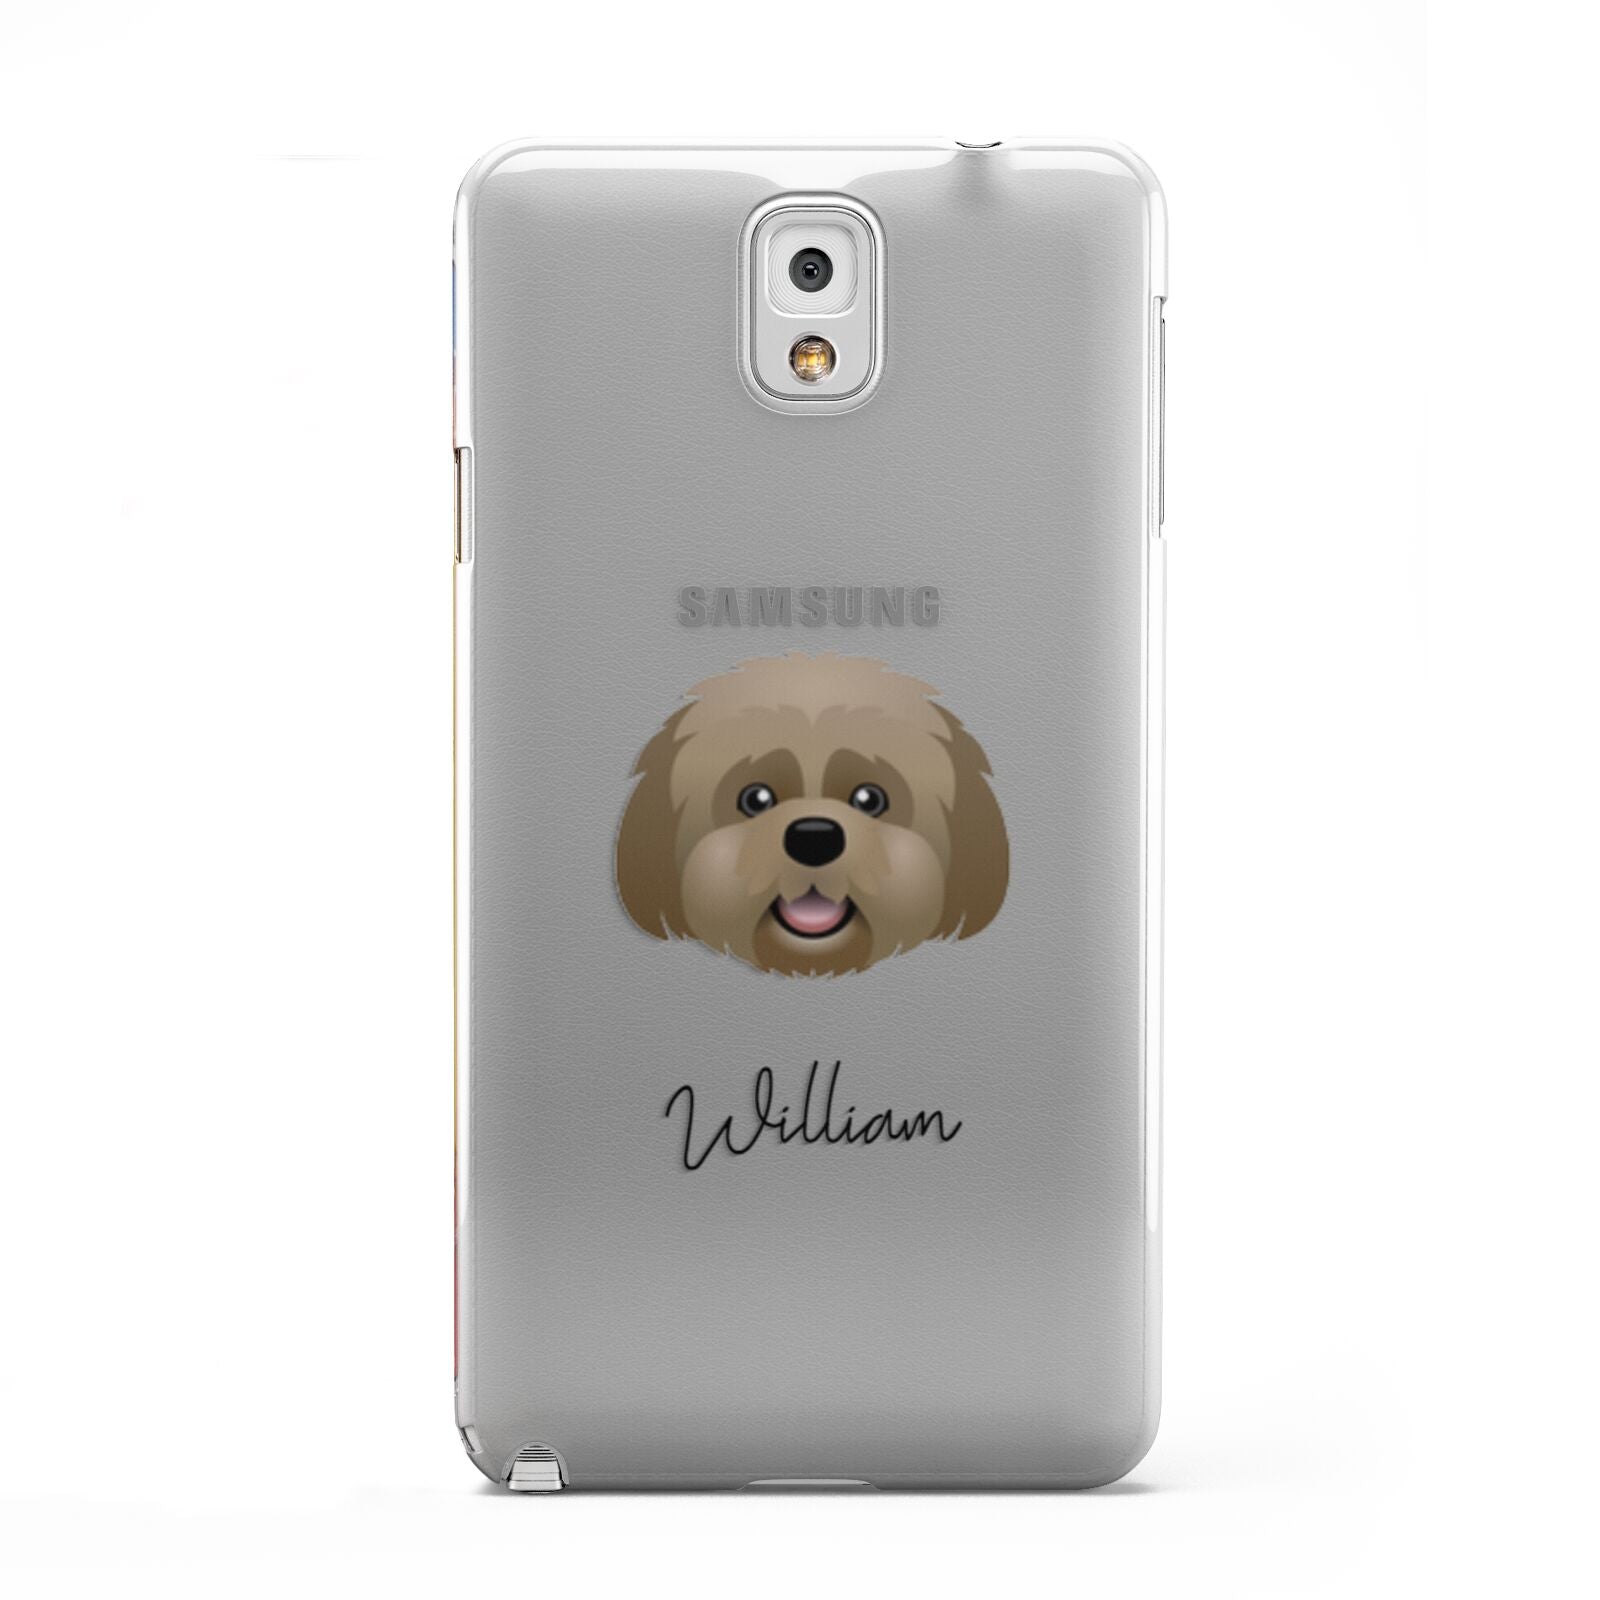 Lhatese Personalised Samsung Galaxy Note 3 Case